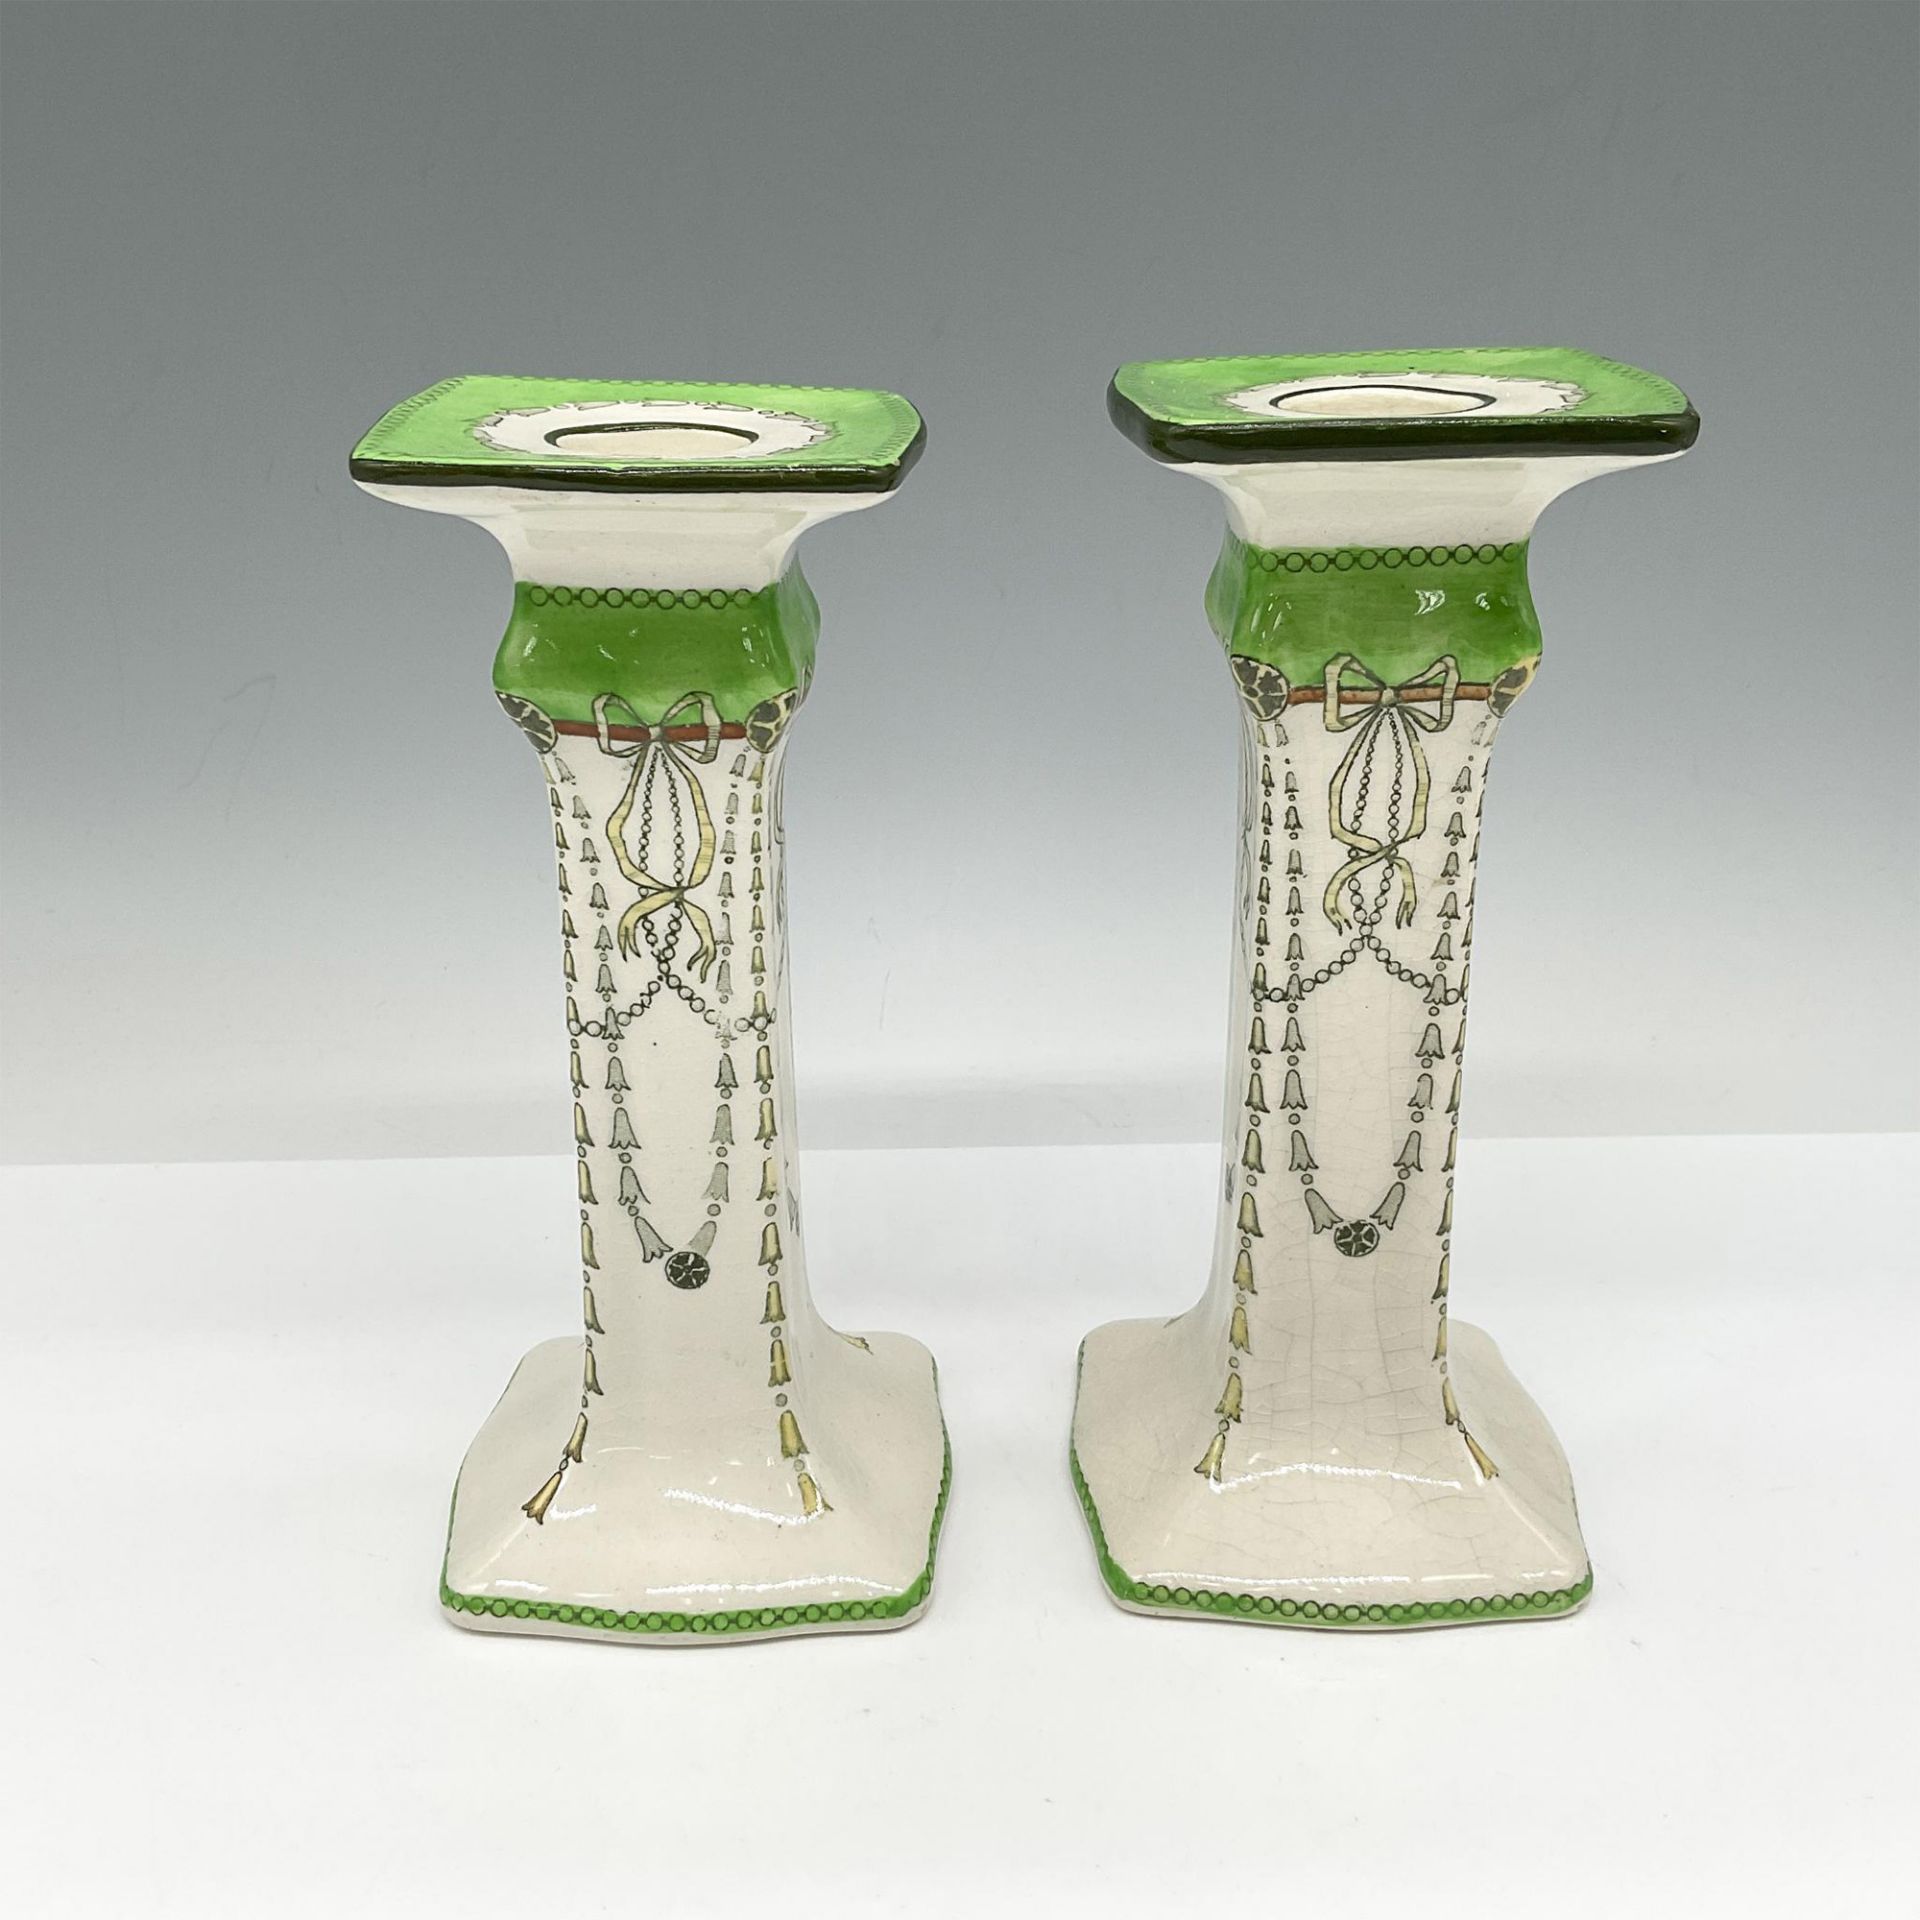 Pair of Royal Doulton Porcelain Candle Holders, Albany D3070